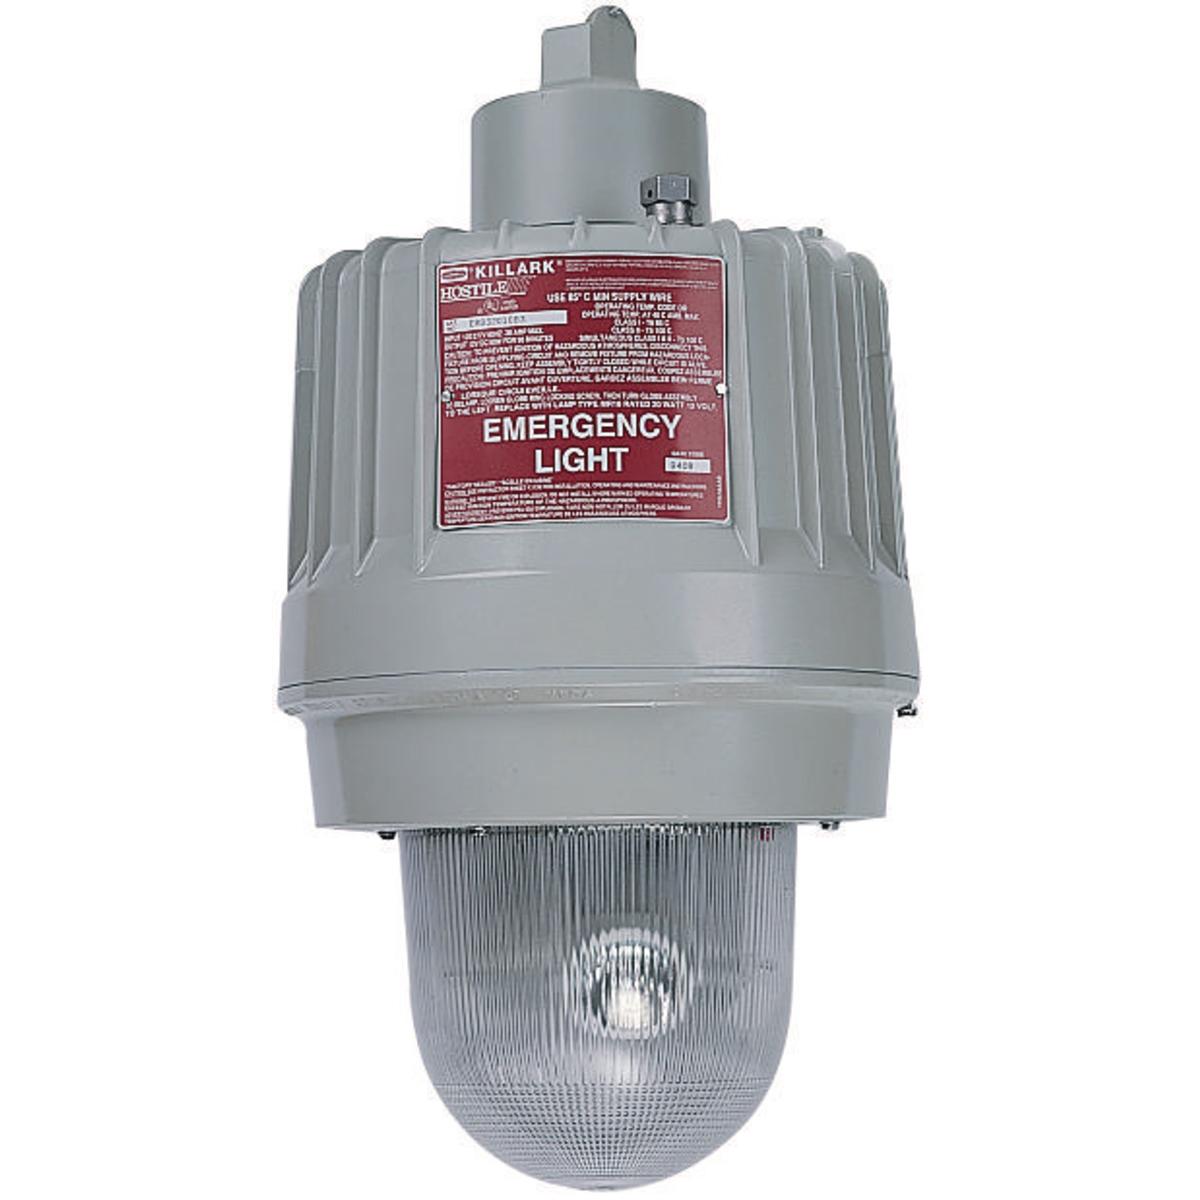 Hubbell EBB32010X3TS EBB Series Emergency Hazardous Location 1" Ceiling Mount with EZX3 TUFS  ; Patented design three high intensity lamps can be independently adjusted to provide custom emergency lighting to a specific area ; Three 20 watt MR16 lamps included ; Pendant, brac